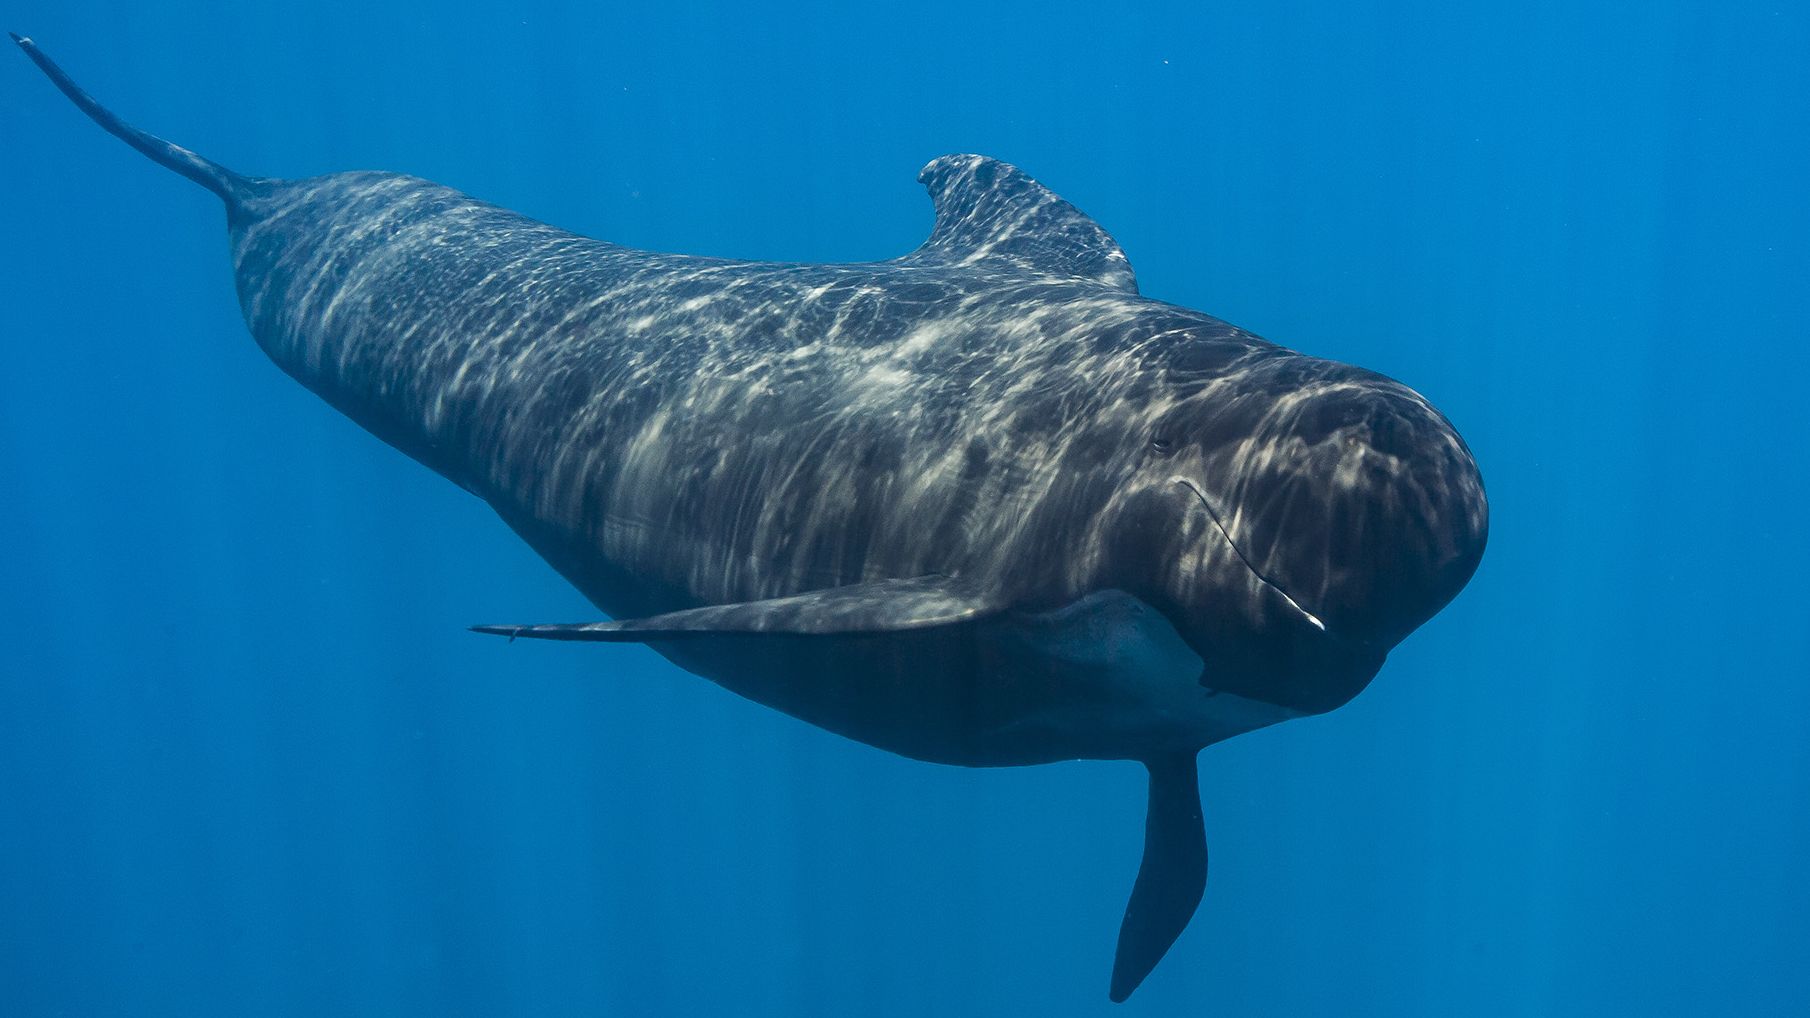 Long-finned pilot whales were among the three aged dolphins that showed similar lesions to humans with Alzheimer's disease.